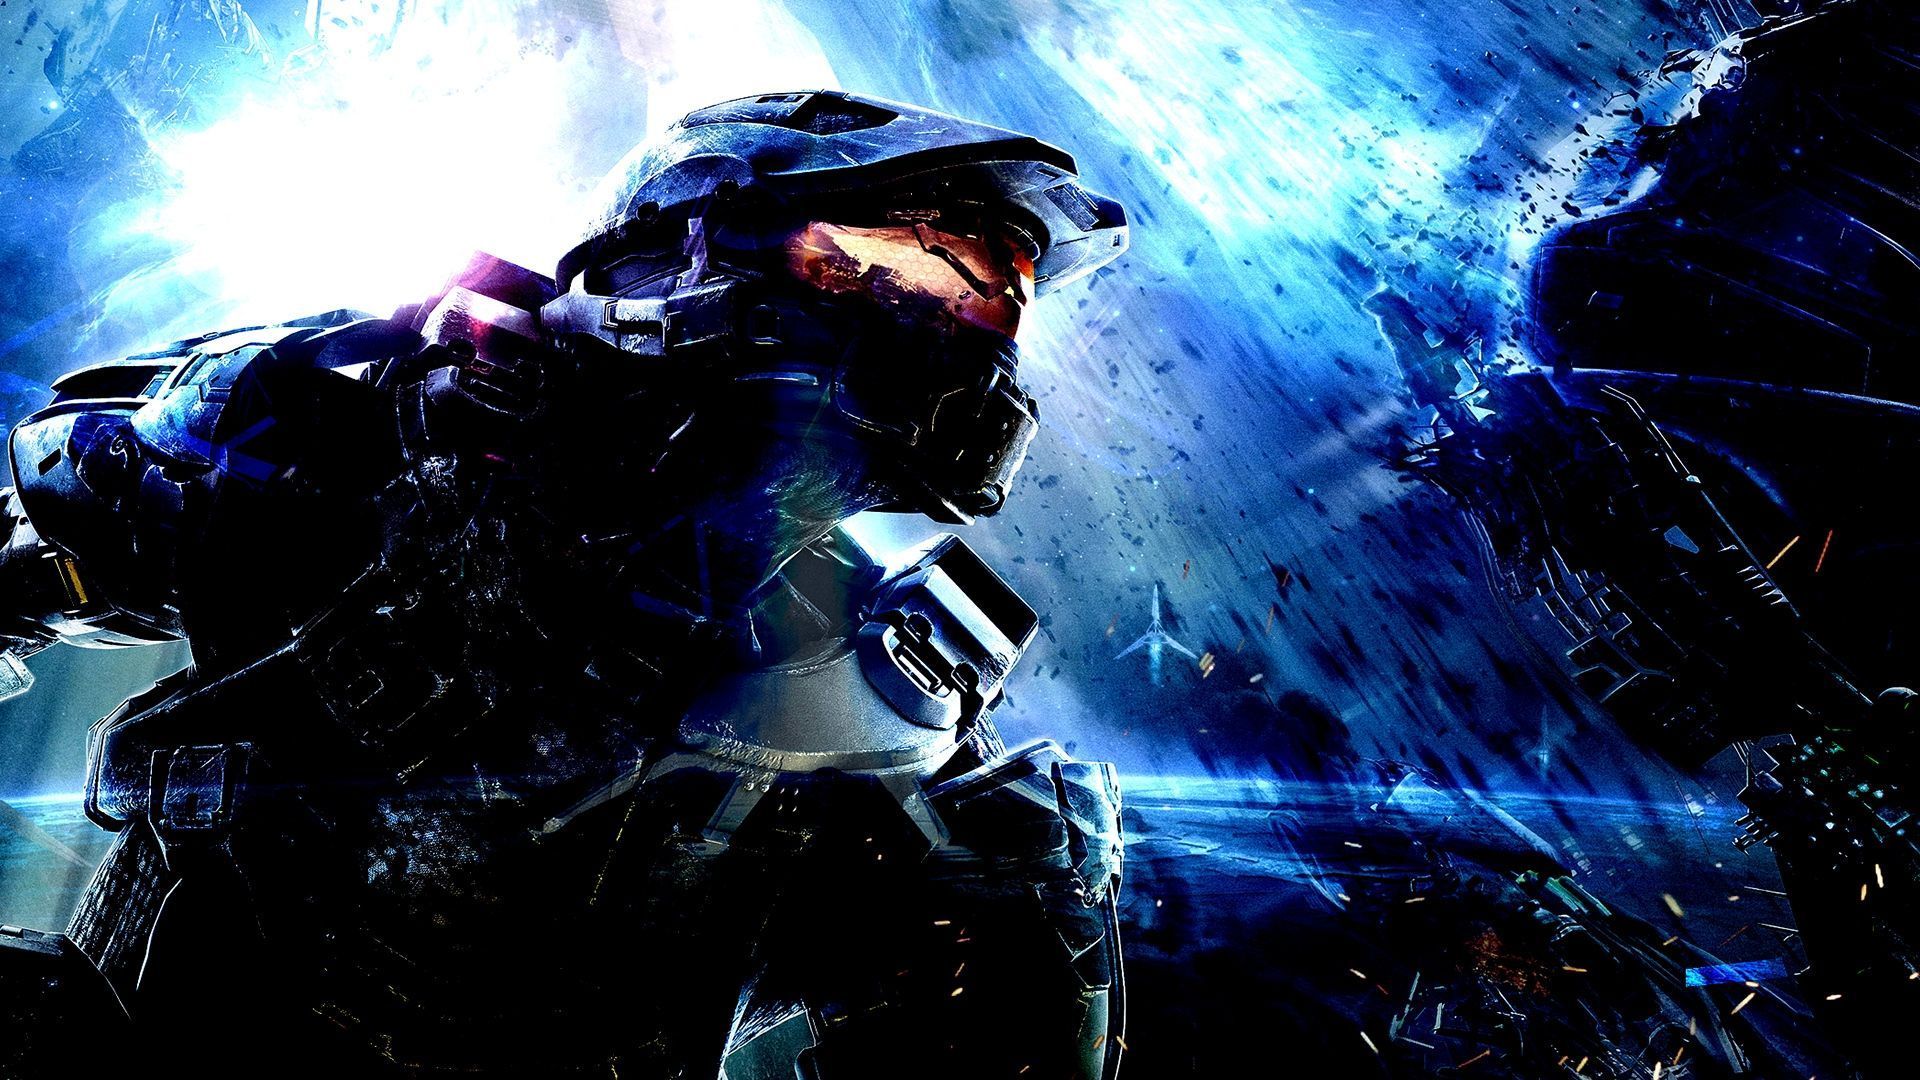 Halo 4 Wallpaper HD Free Download New HD Wallpapers Download